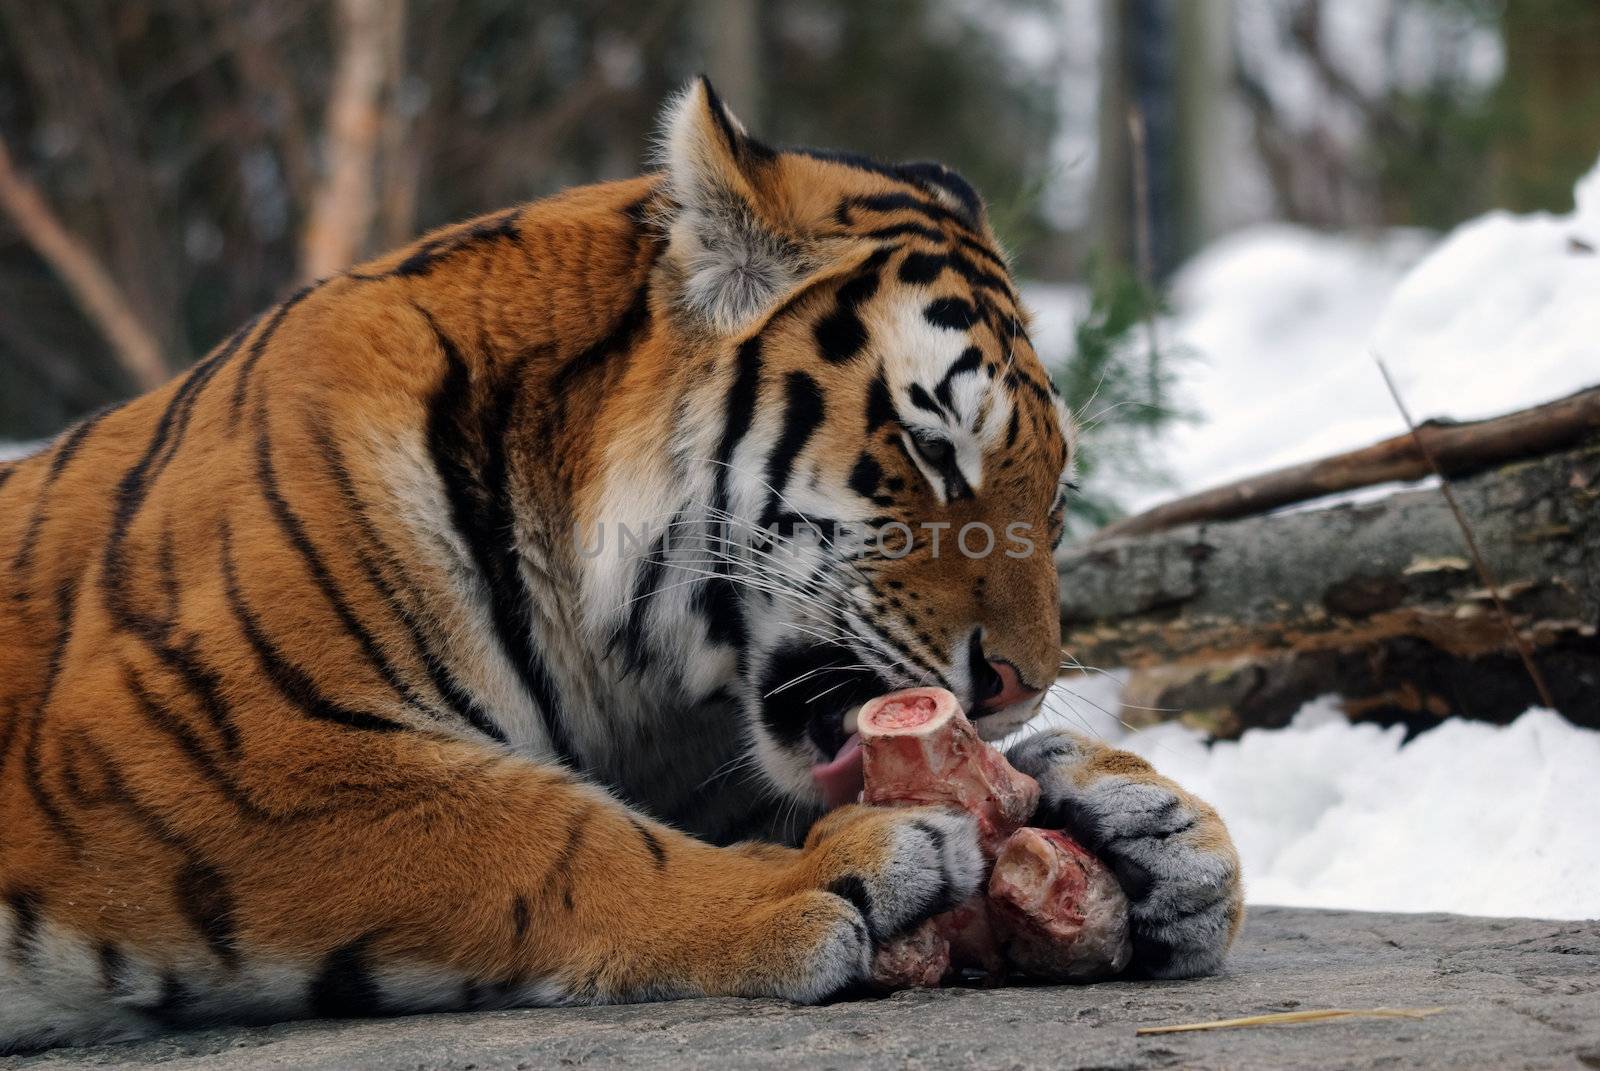 Close-up picture of a Siberian Tiger on a cold Winter day